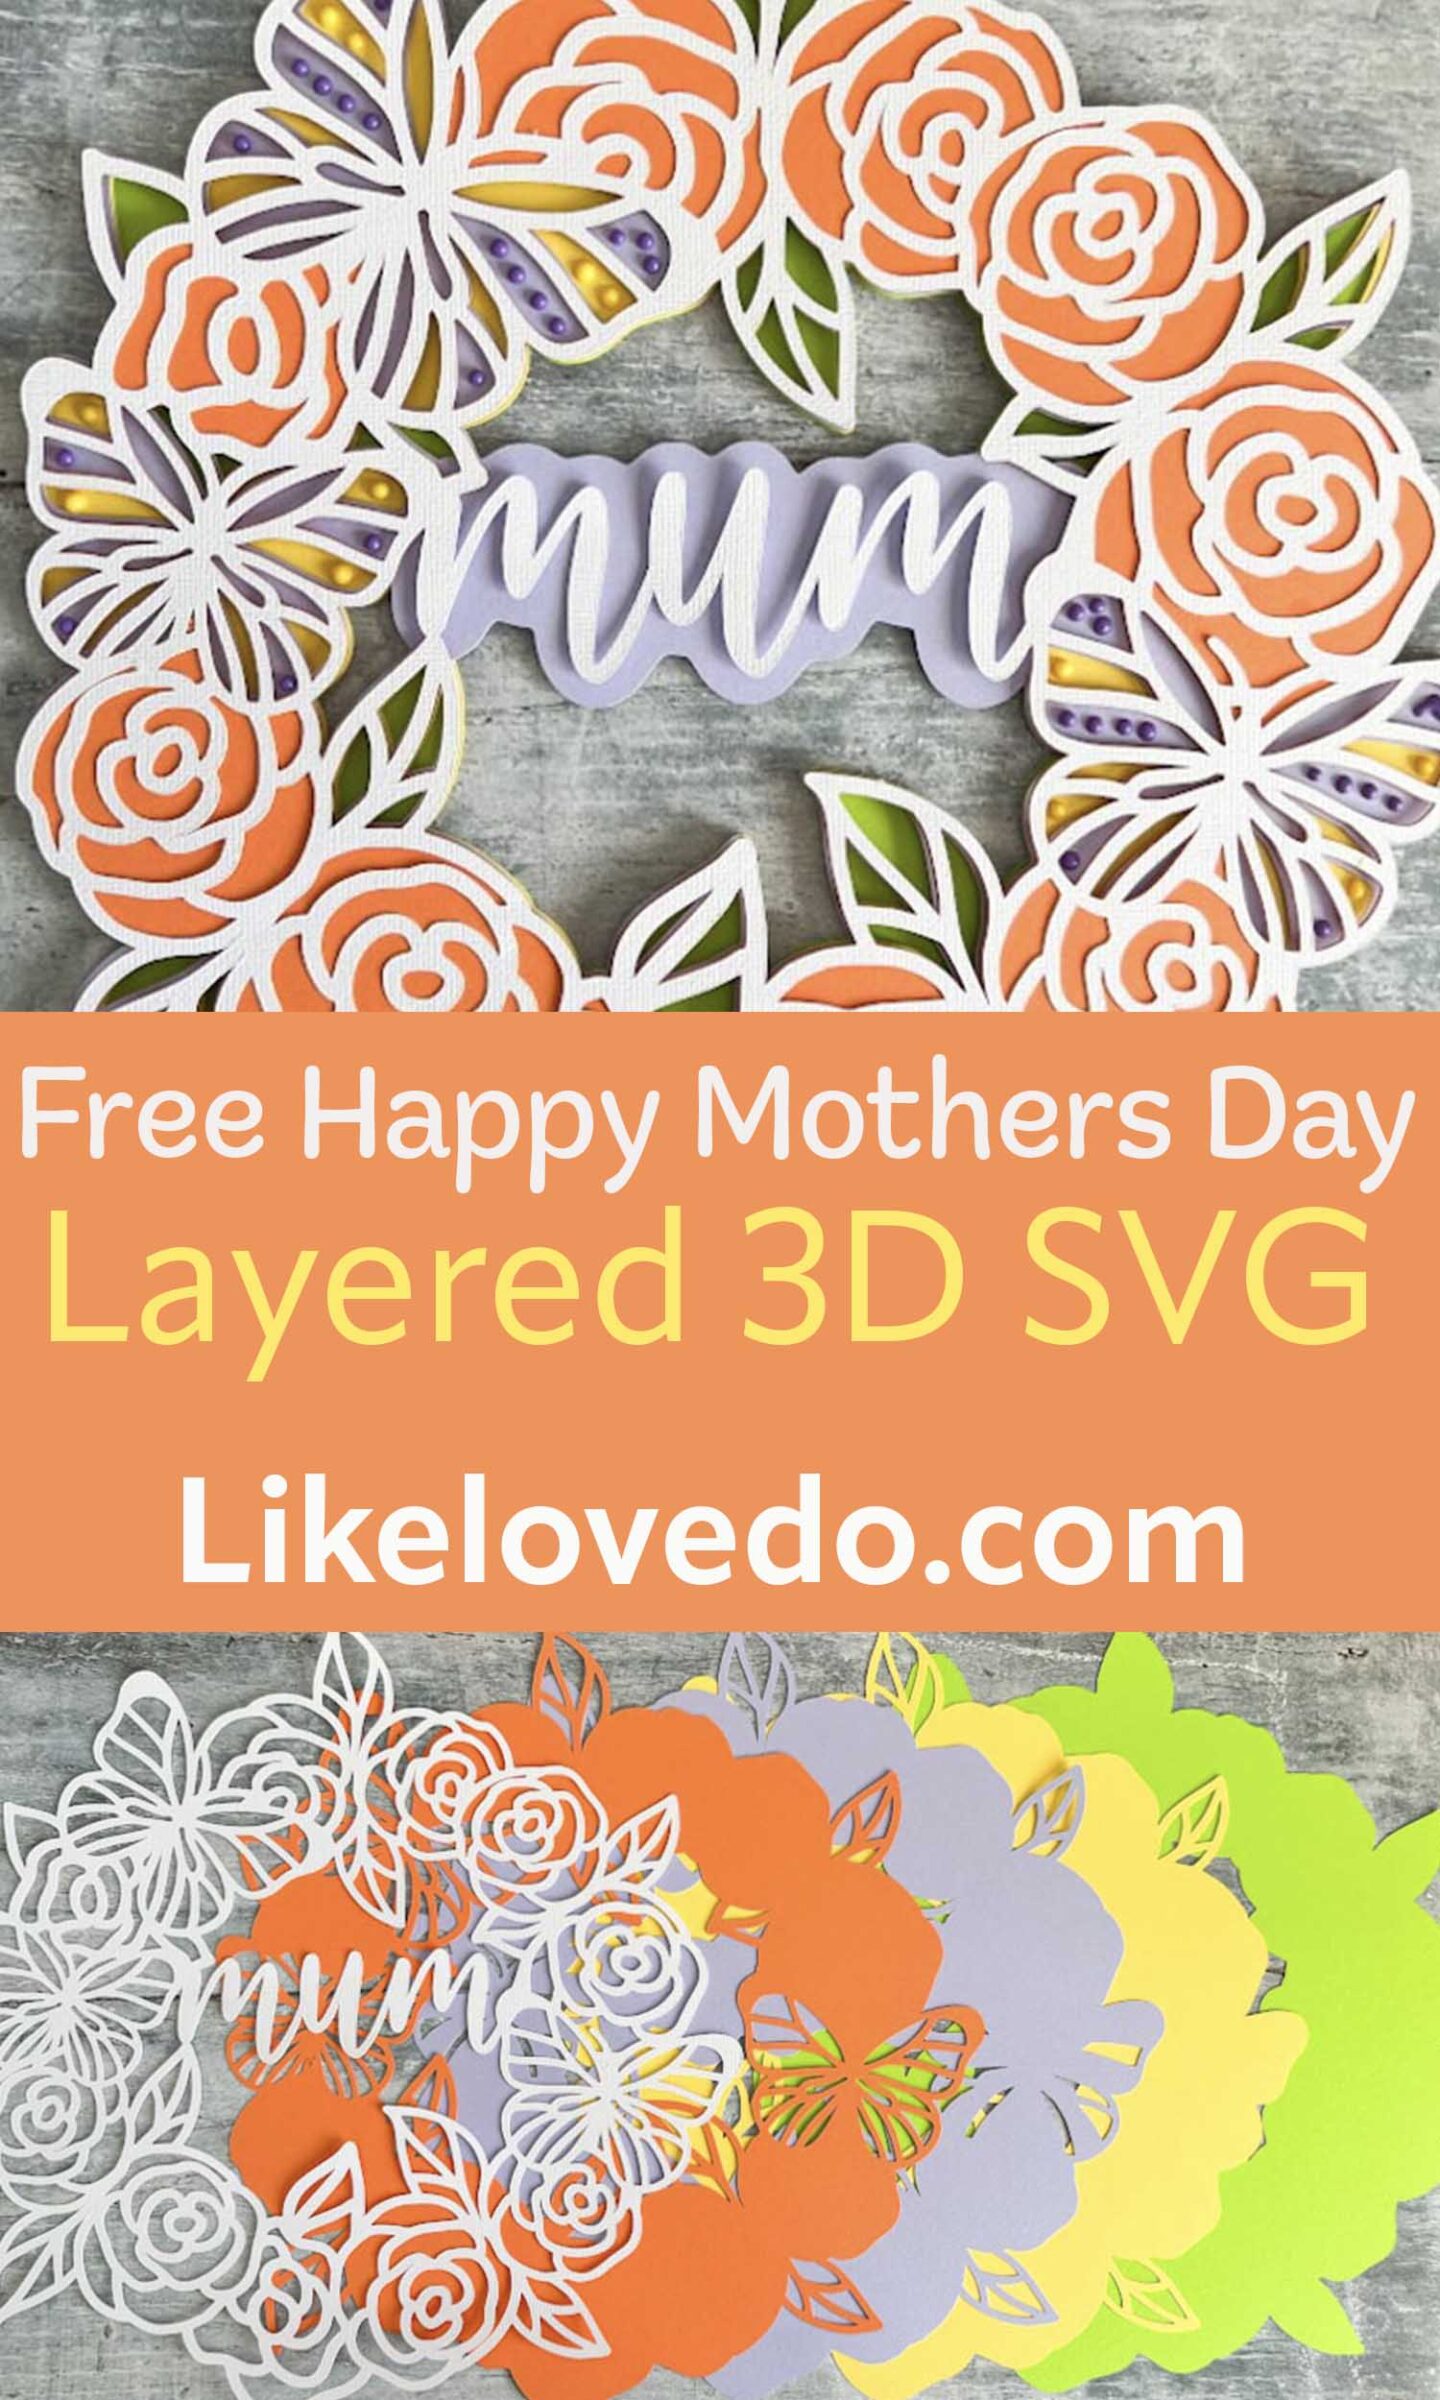 3D effect Free Layered Mother’s Day Wreath SVG cut in card with orange roses and butterflies.